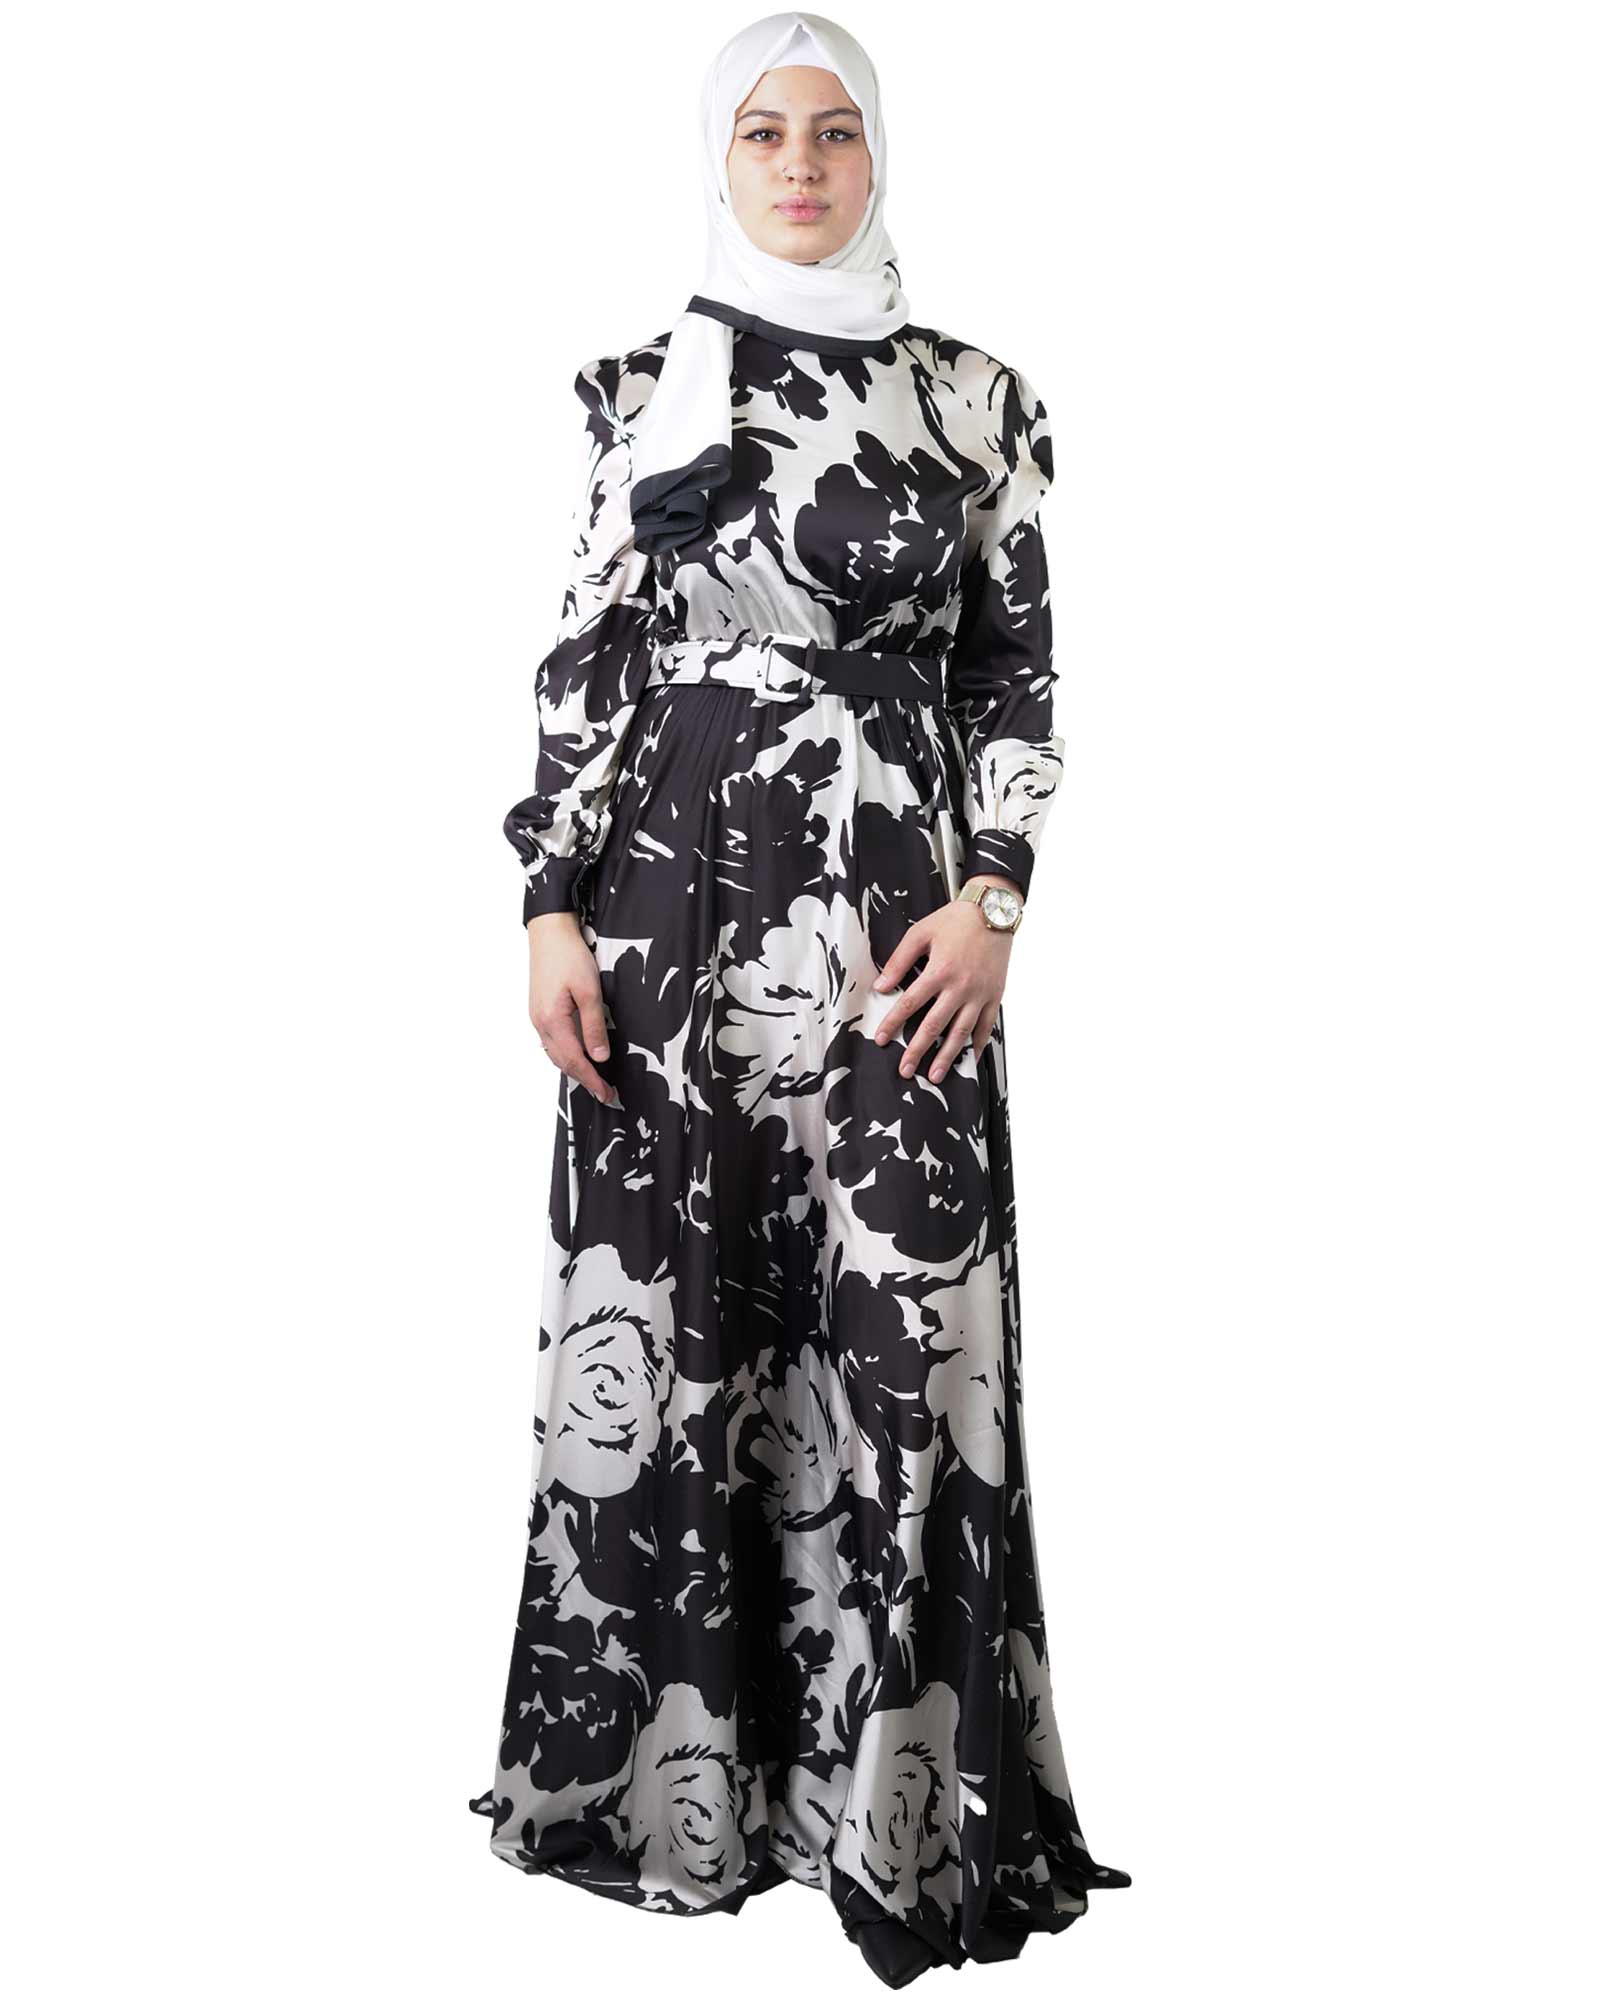 Satin dress with floral pattern and belt